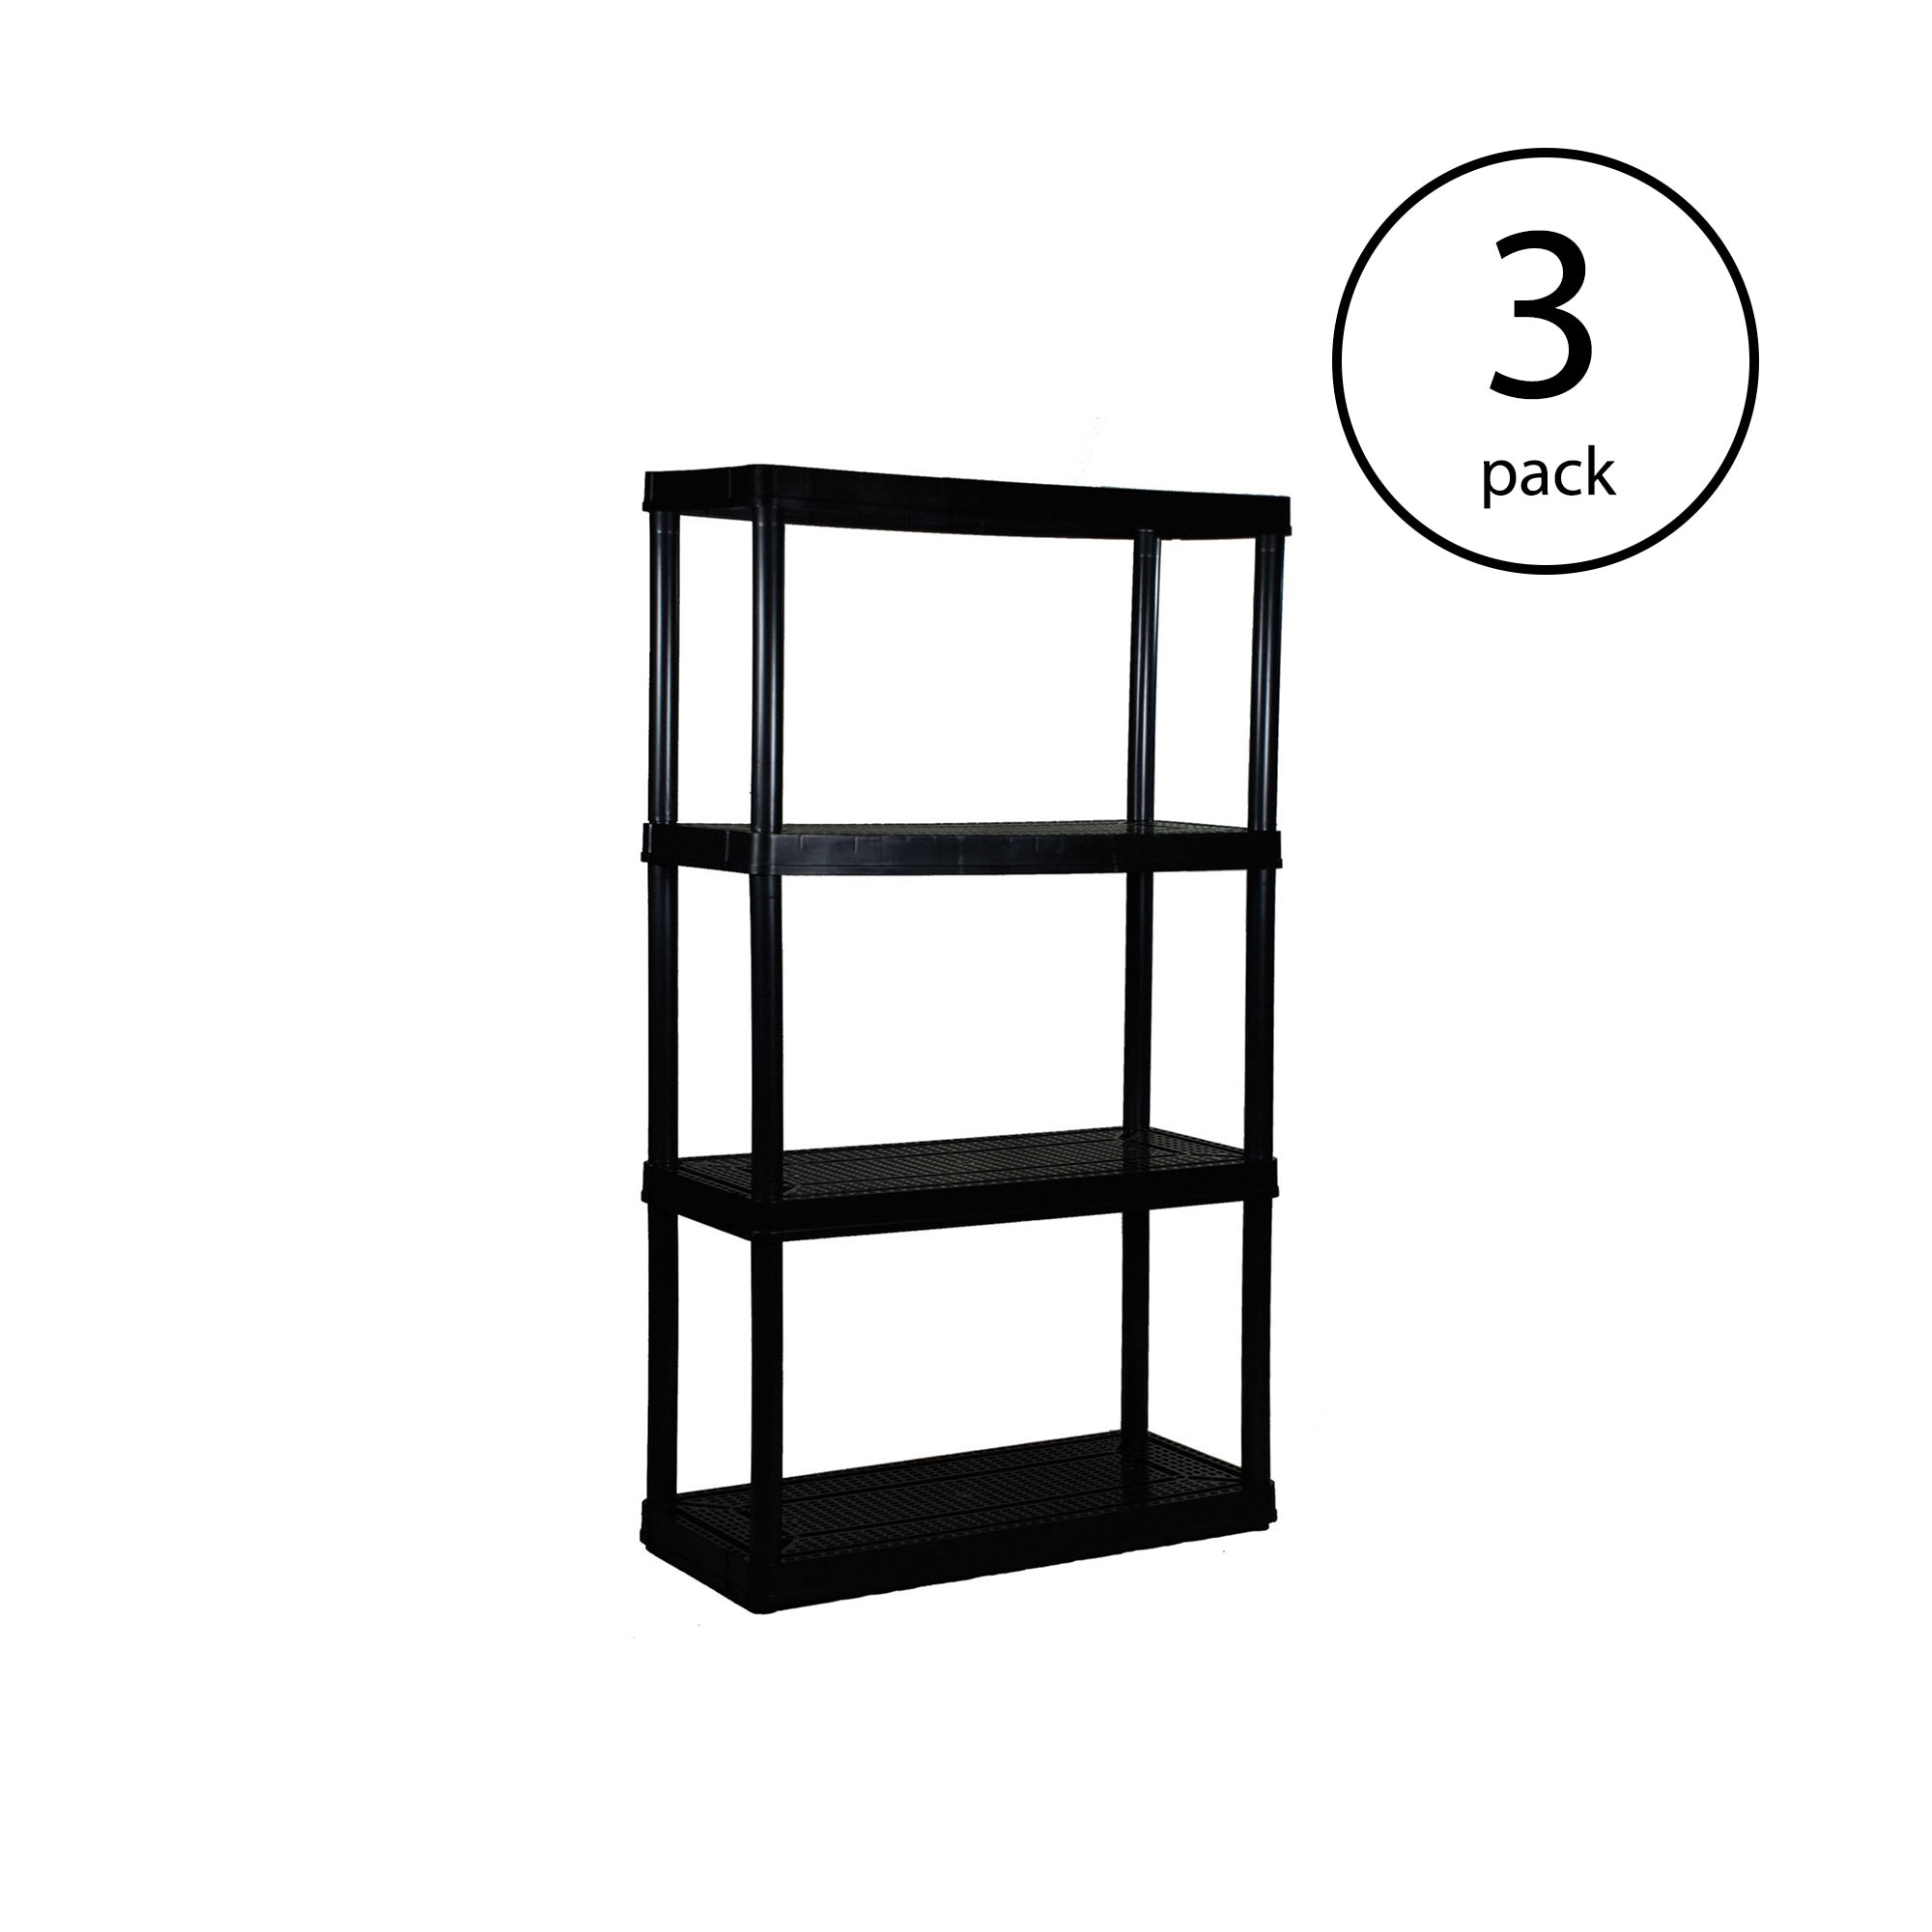 Gracious Living Multipurpose 4 Shelf Fixed Height Solid Plastic Resin  Storage Unit for Indoor and Outdoor Home or Office Organization - Black